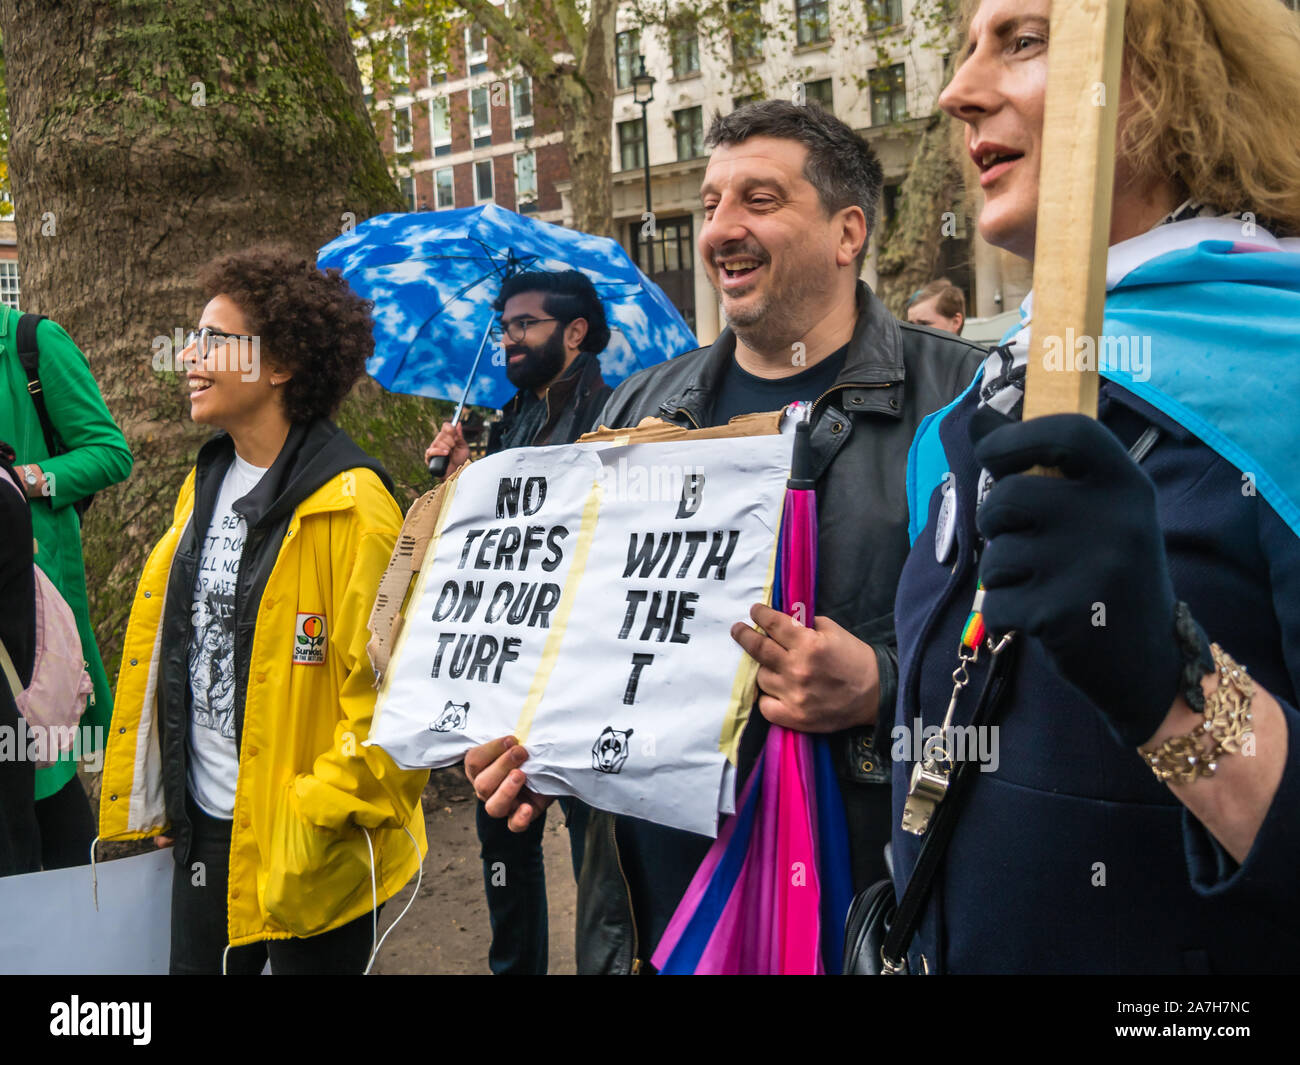 London, UK. 2nd November 2019. 'No Terfs On Our Turf'. A protest in Soho Square opposed the activities of a new hate group which promotes transphobia, calling itself the 'LGB Alliance', claiming it is protecting LGB people. The protest pointed out that trans and non-binary people have always been a part of the gay community and played an important part in the fight for gay rights and there is no place for such bi-phobic and gay-separist views in the gay community. Peter Marshall/Alamy Live News Stock Photo